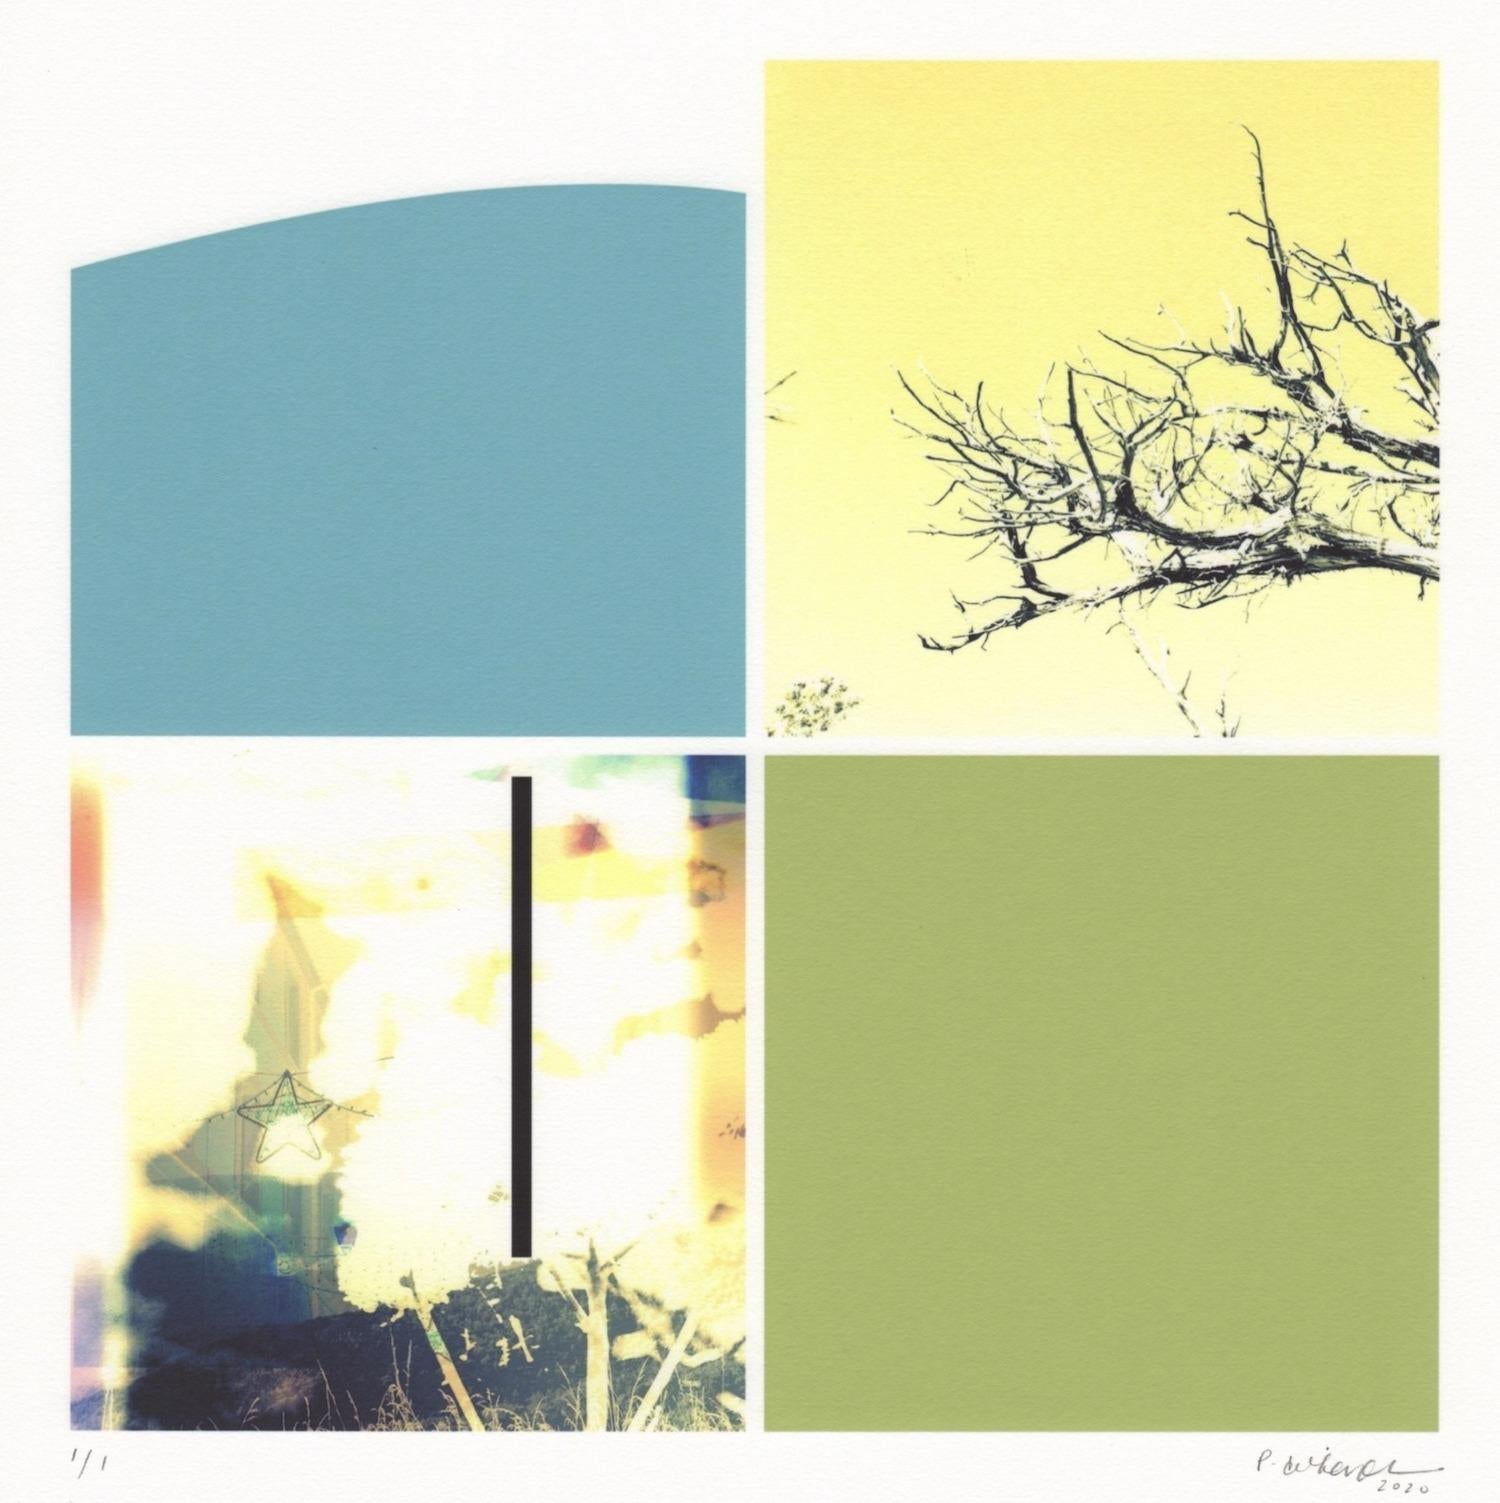 Patty deGrandpre Abstract Print - "Substance of Form and Landscape", abstract, photography, green, blue, yellow